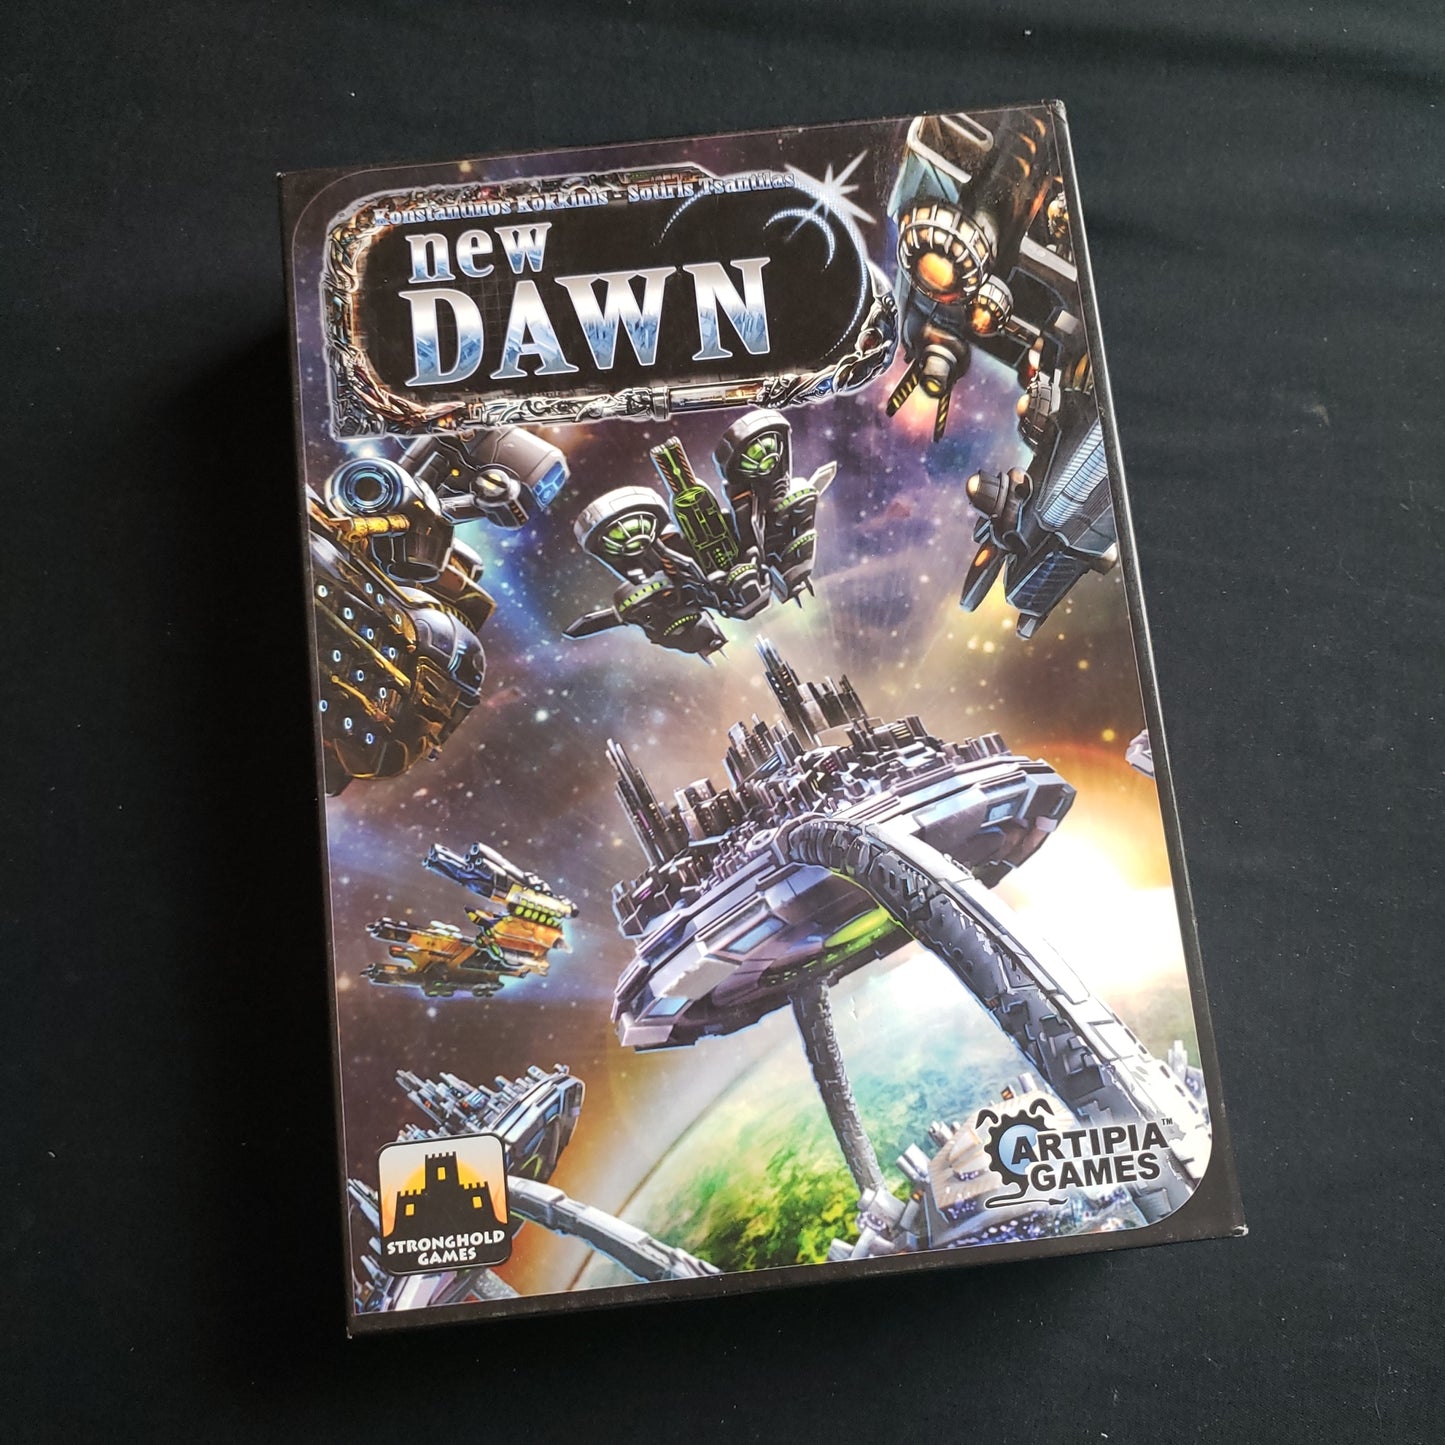 Image shows the front cover of the box of the New Dawn board game